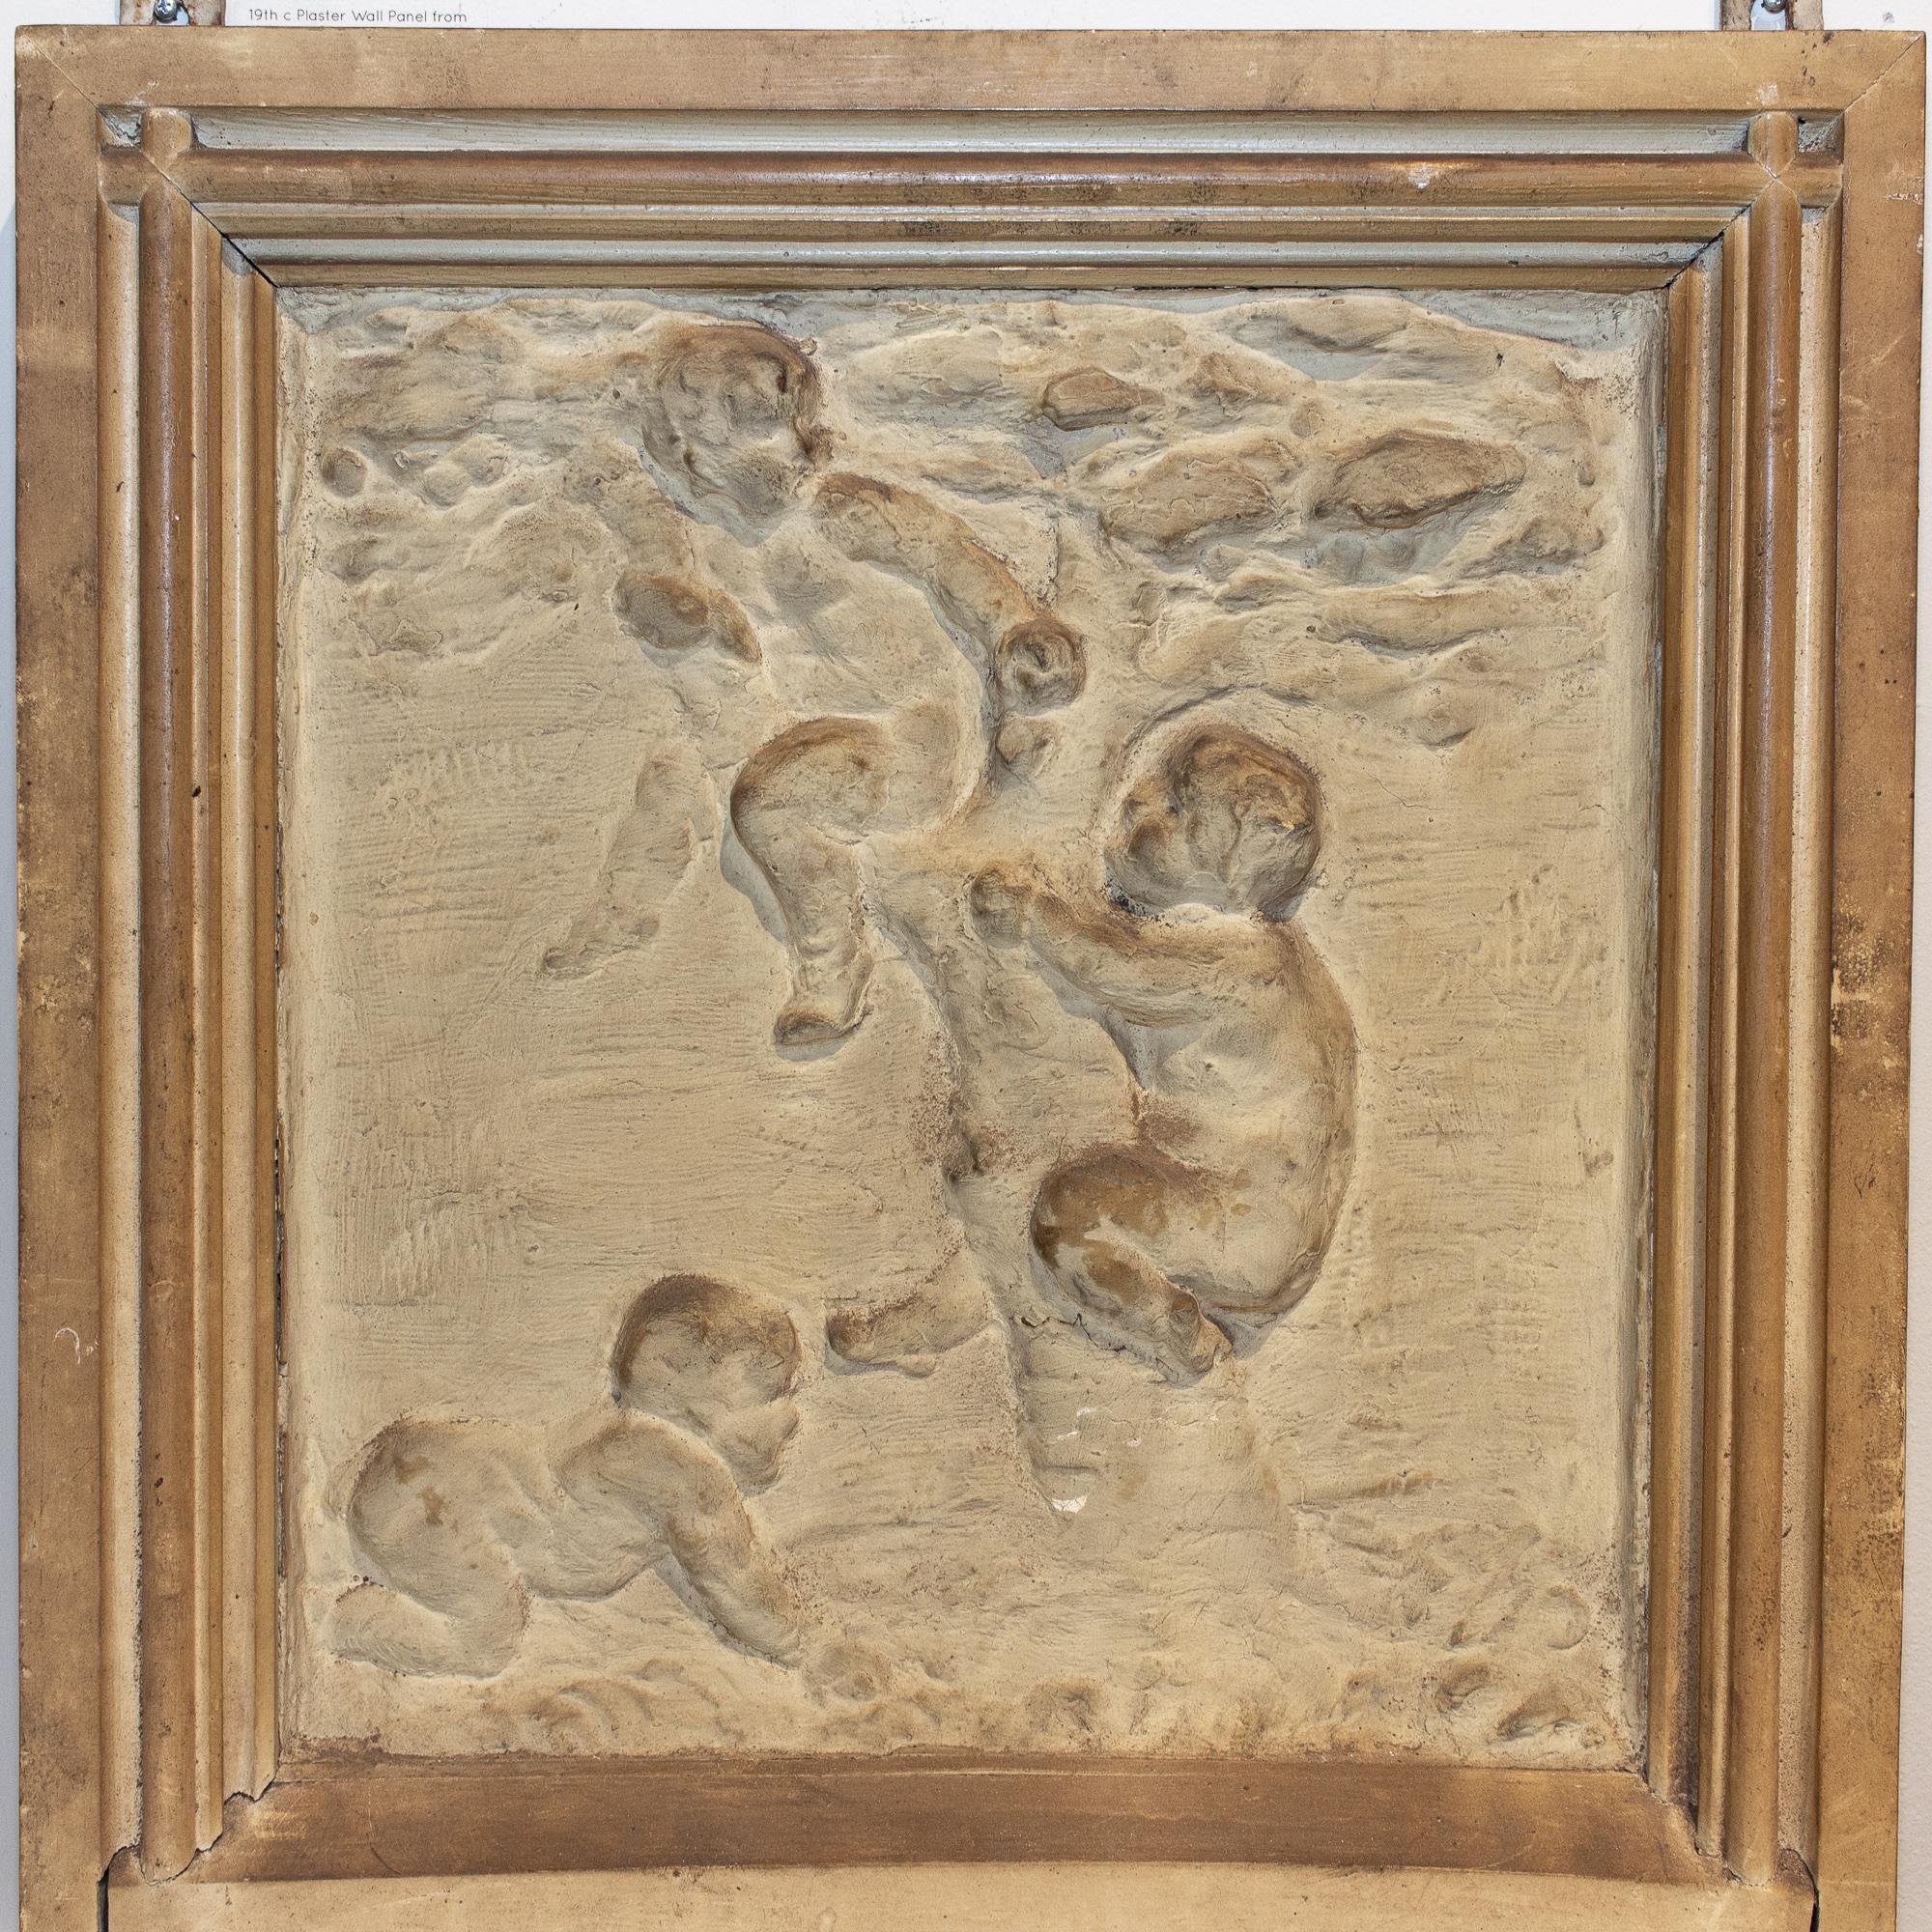 This is an antique plaster panel sourced in Antwerp, Belgium. This piece features an image depicting chubby infants at play in and around a tree (wings are not evident, so we are unsure if these are meant to be cherubim or other mythological